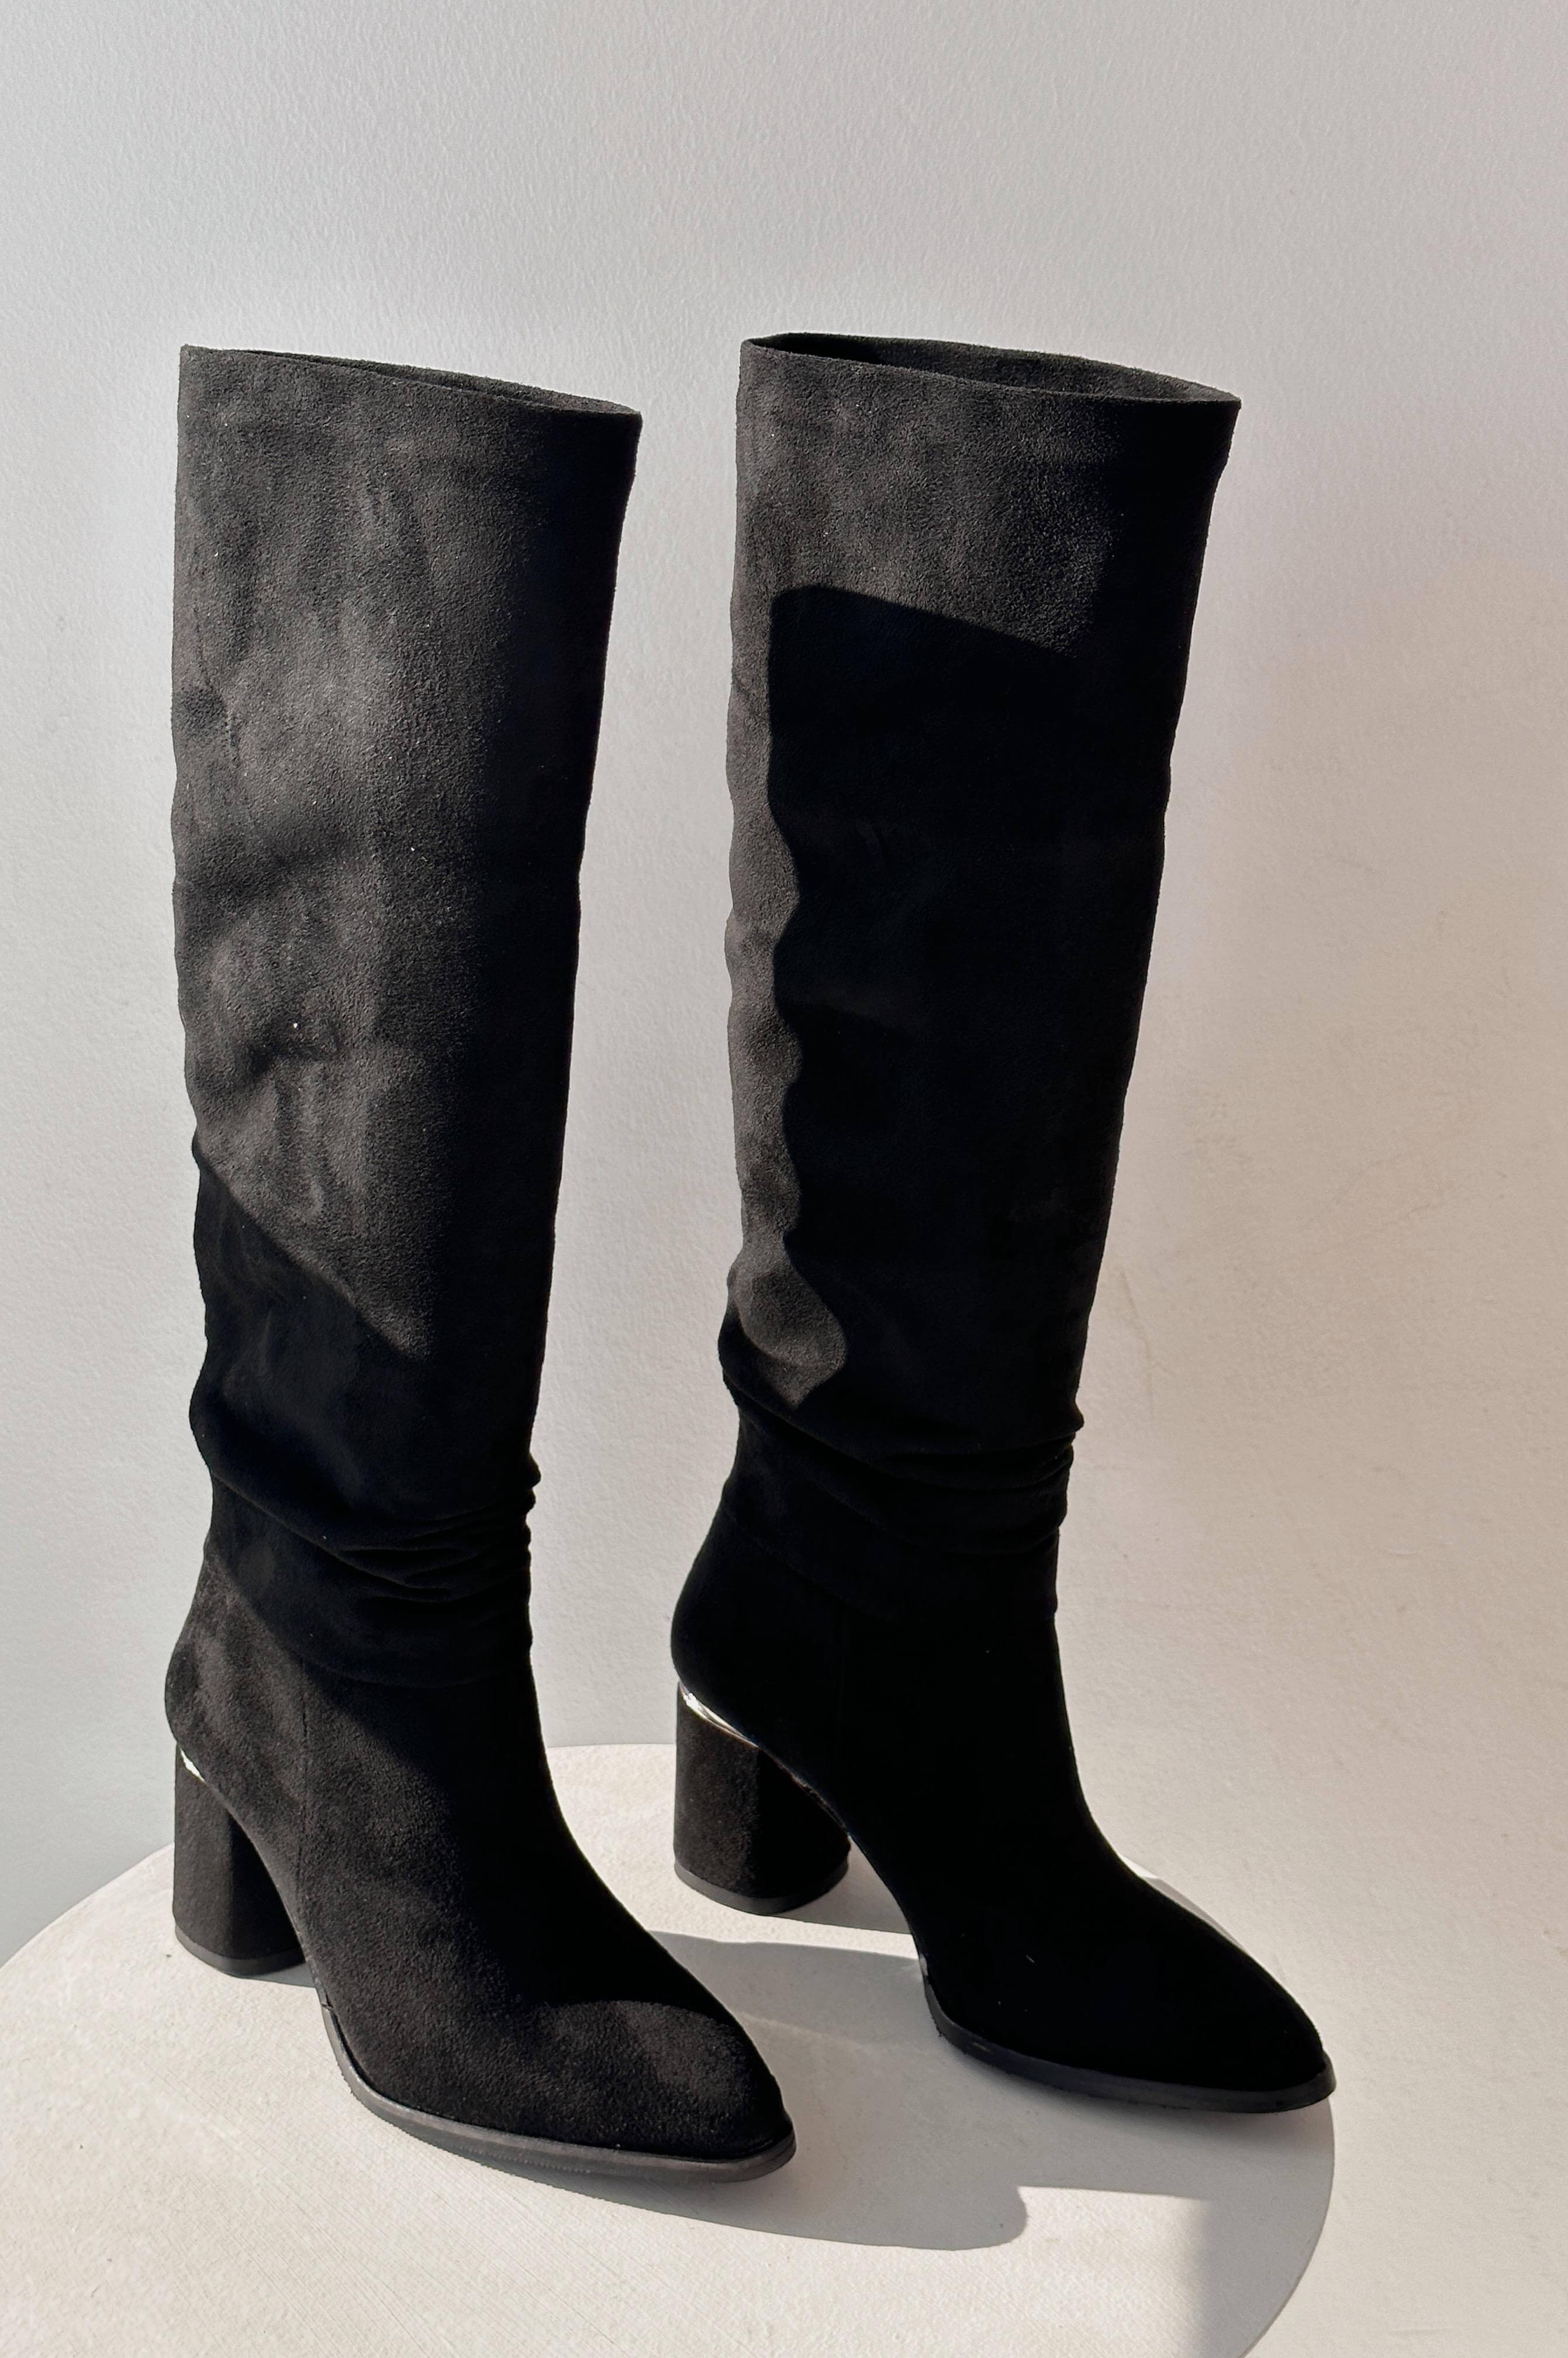 Votens suede bellows woman heeled boots black